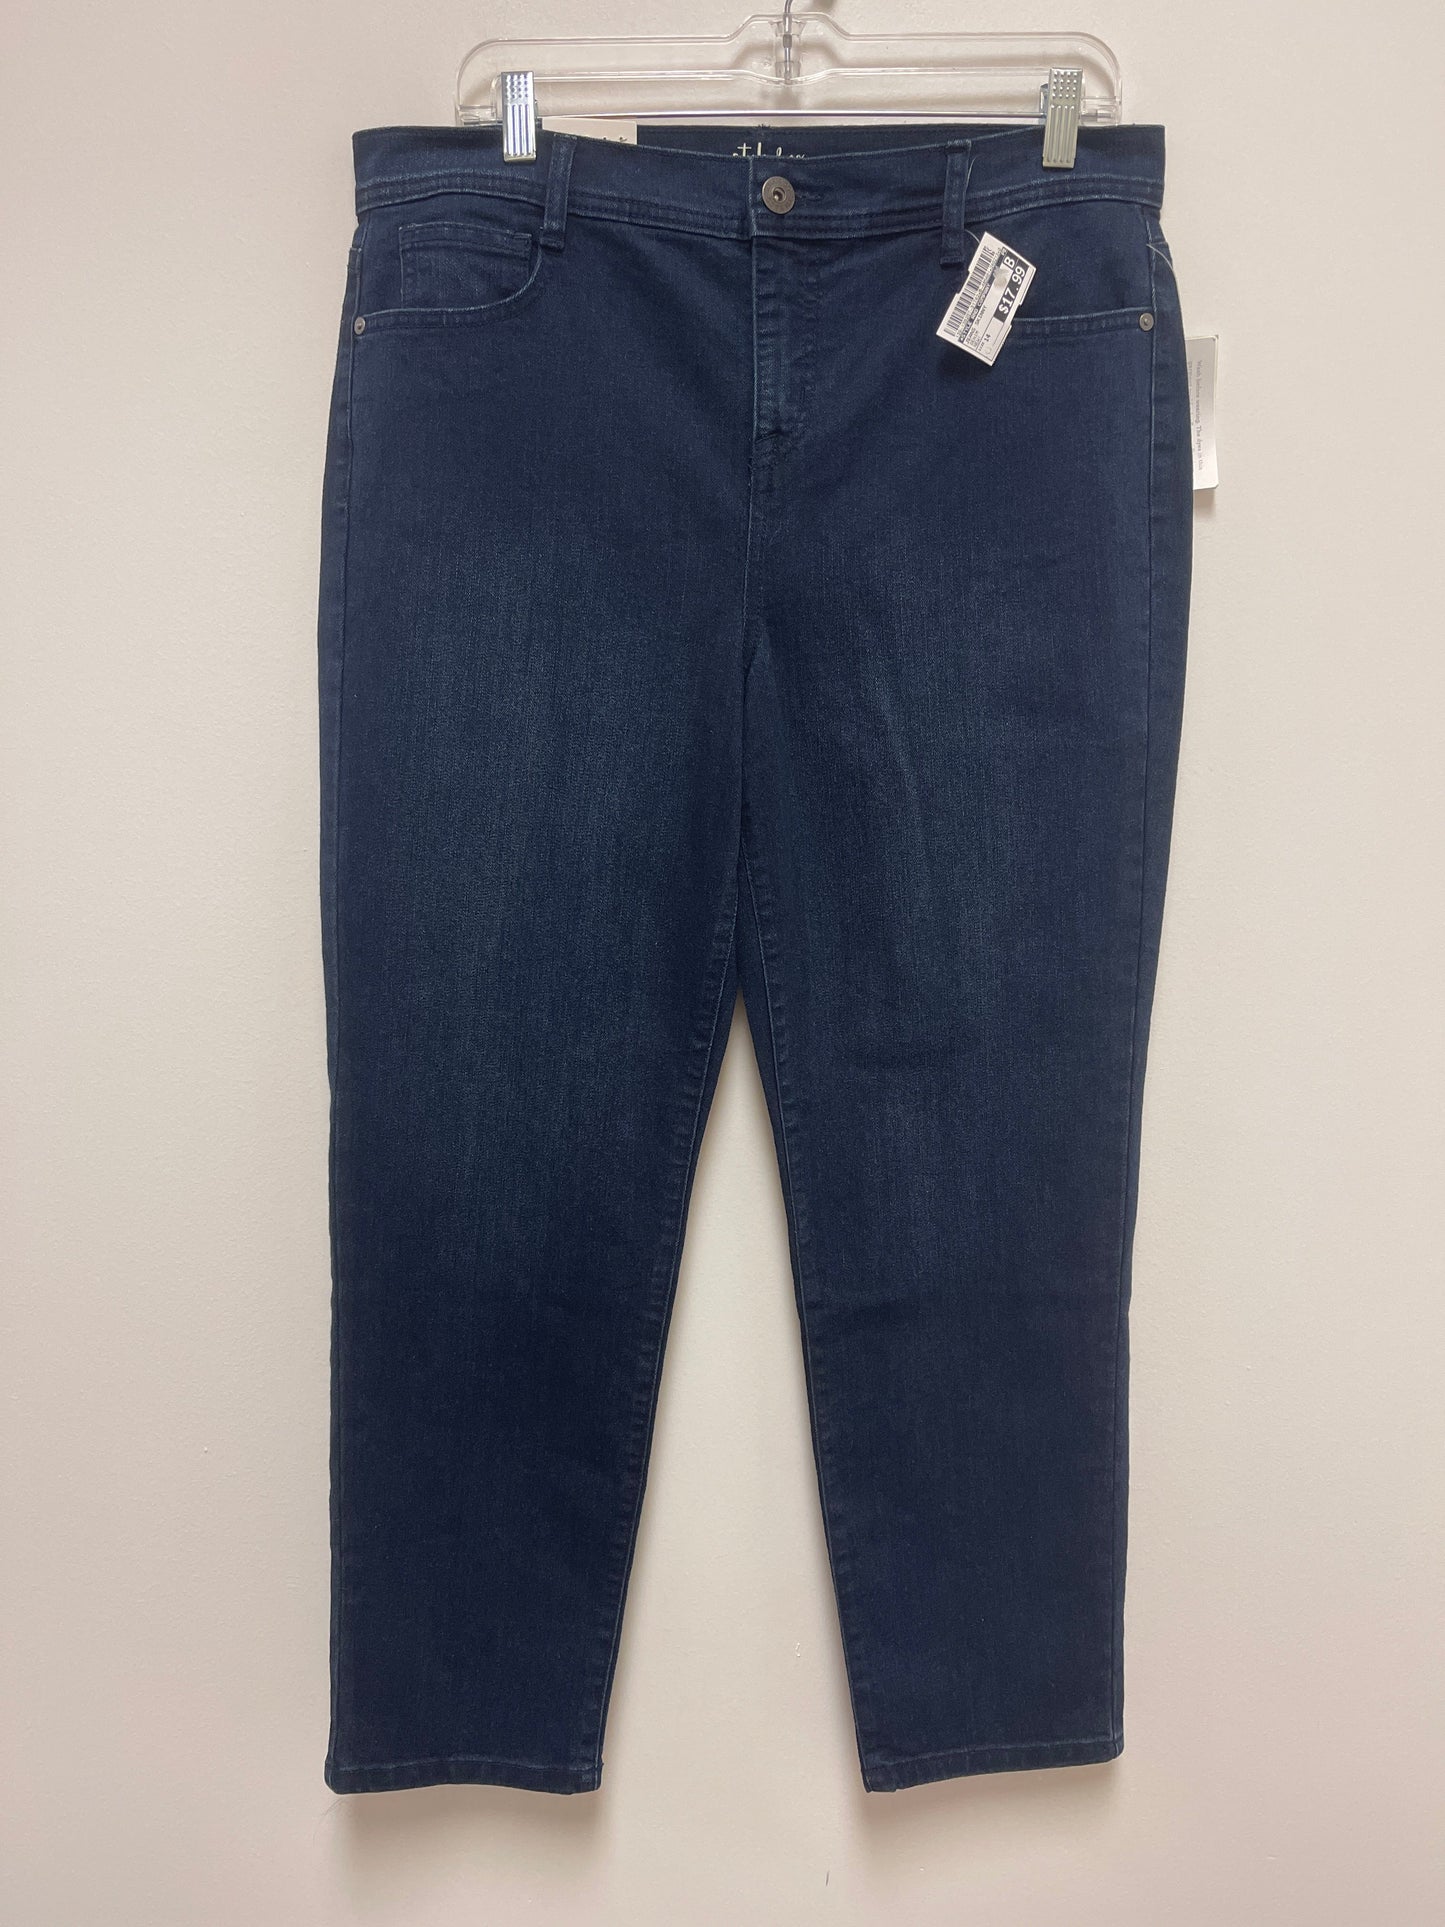 Jeans Skinny By Style And Company  Size: 14